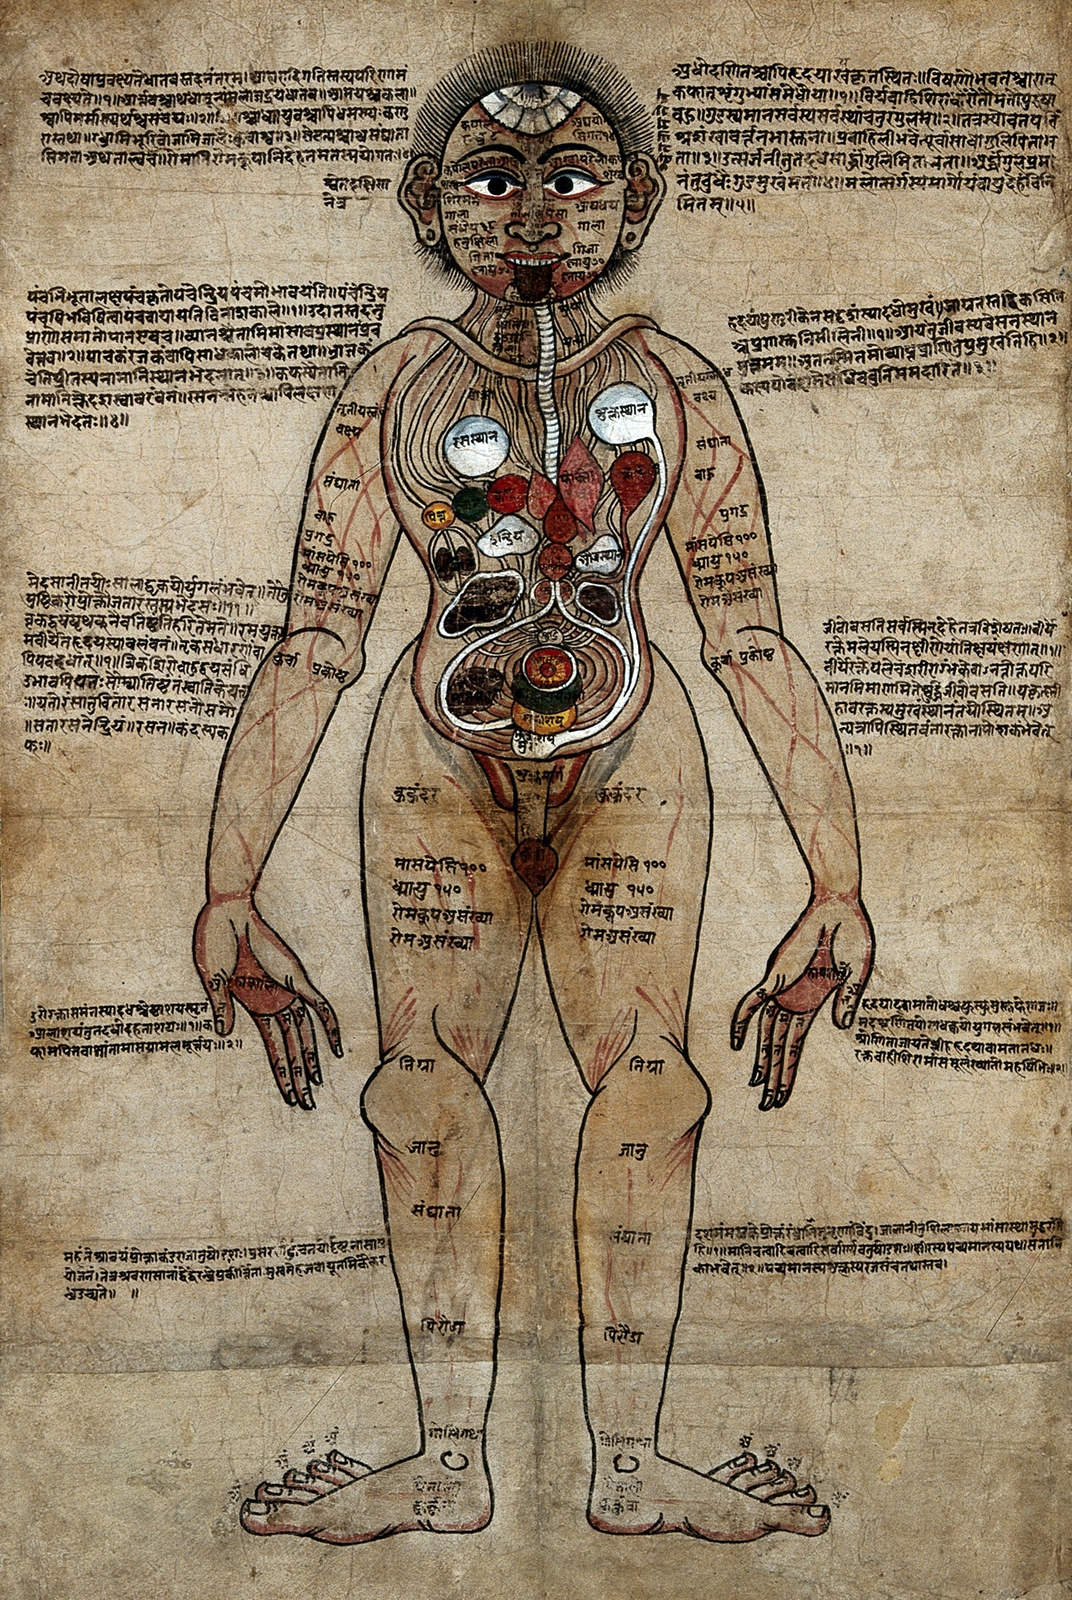 A colour anatomical illustration of a man, face on, with organs and veins shown, with Nepalese and Sanskrit texts surrounding it.